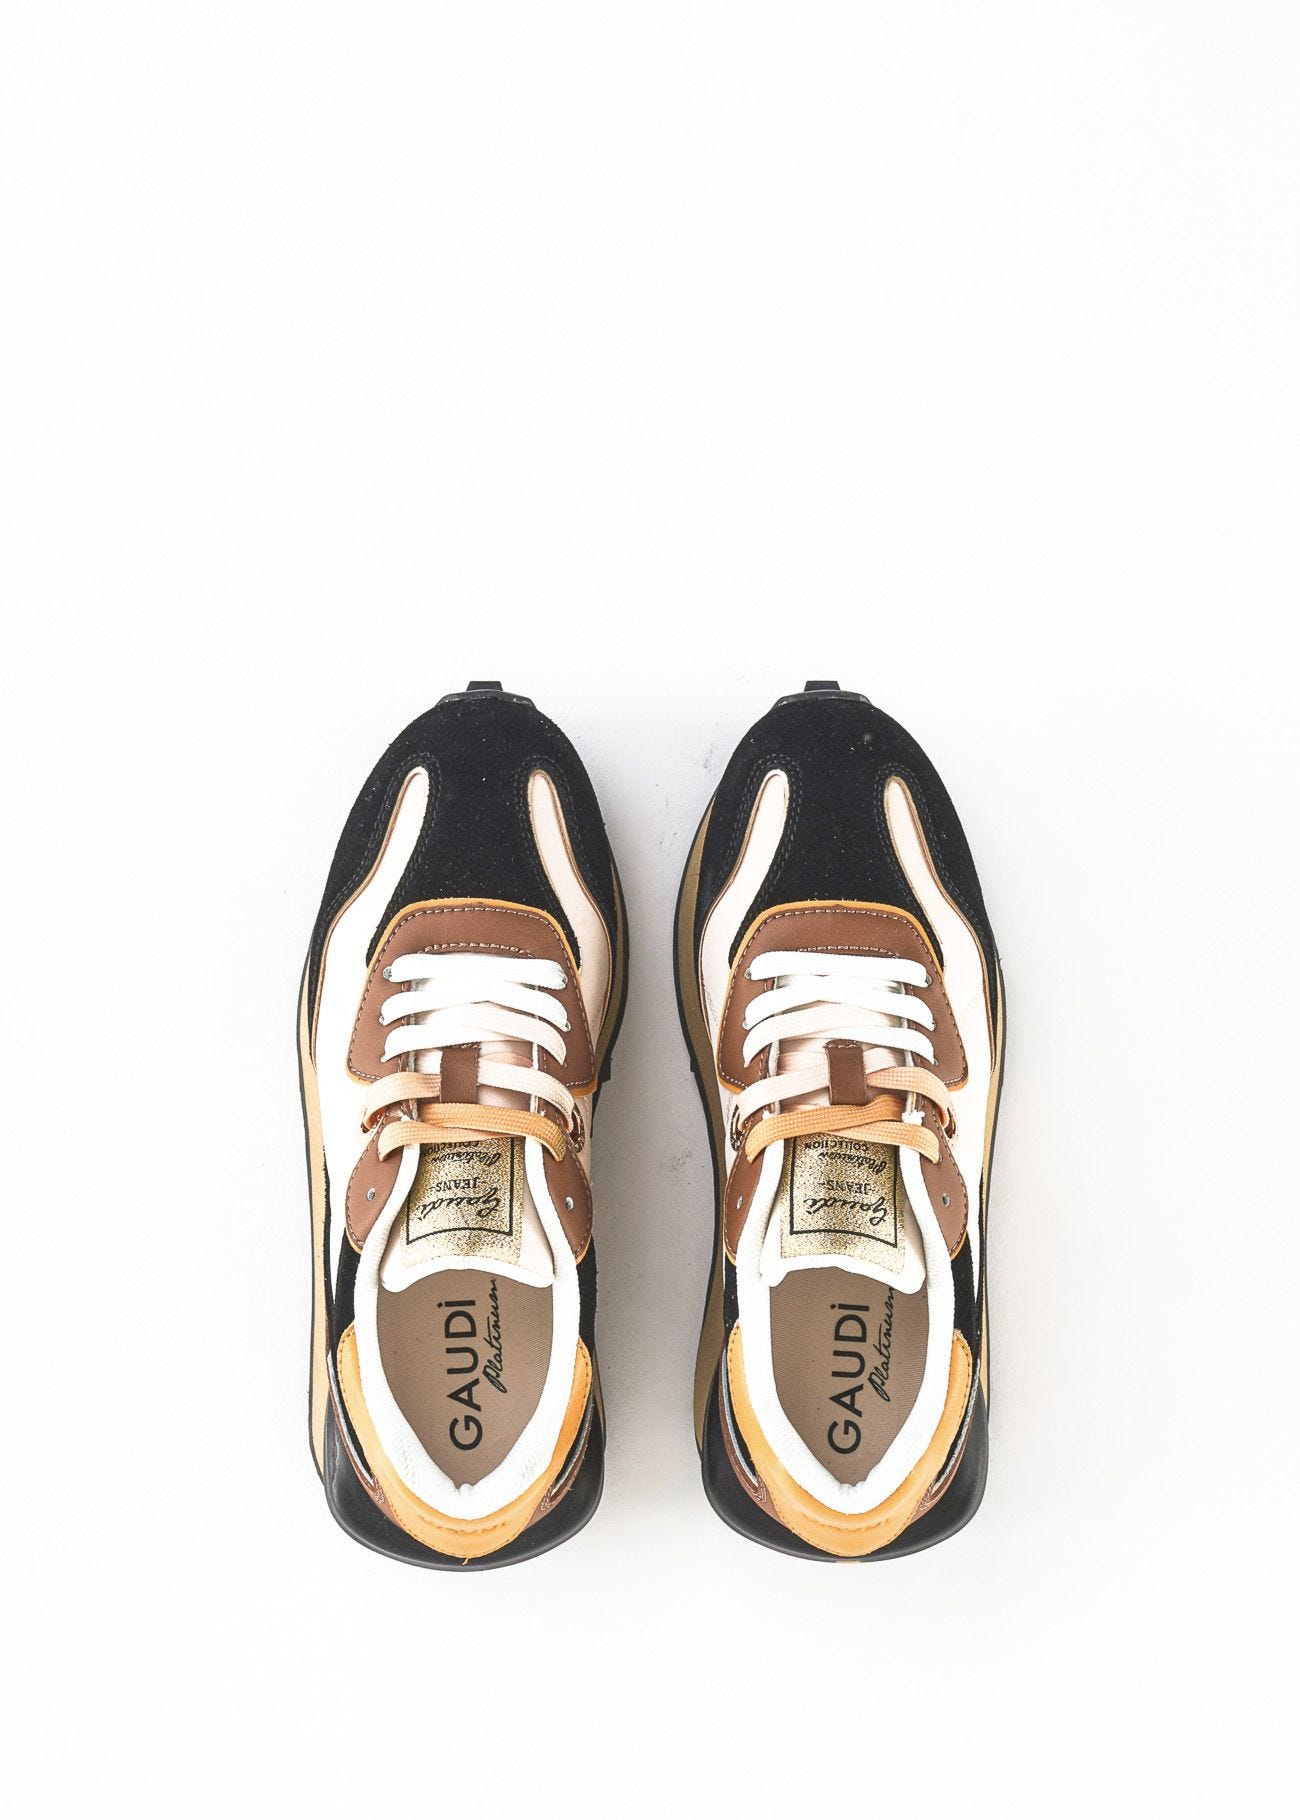 Vintage-inspired trainers